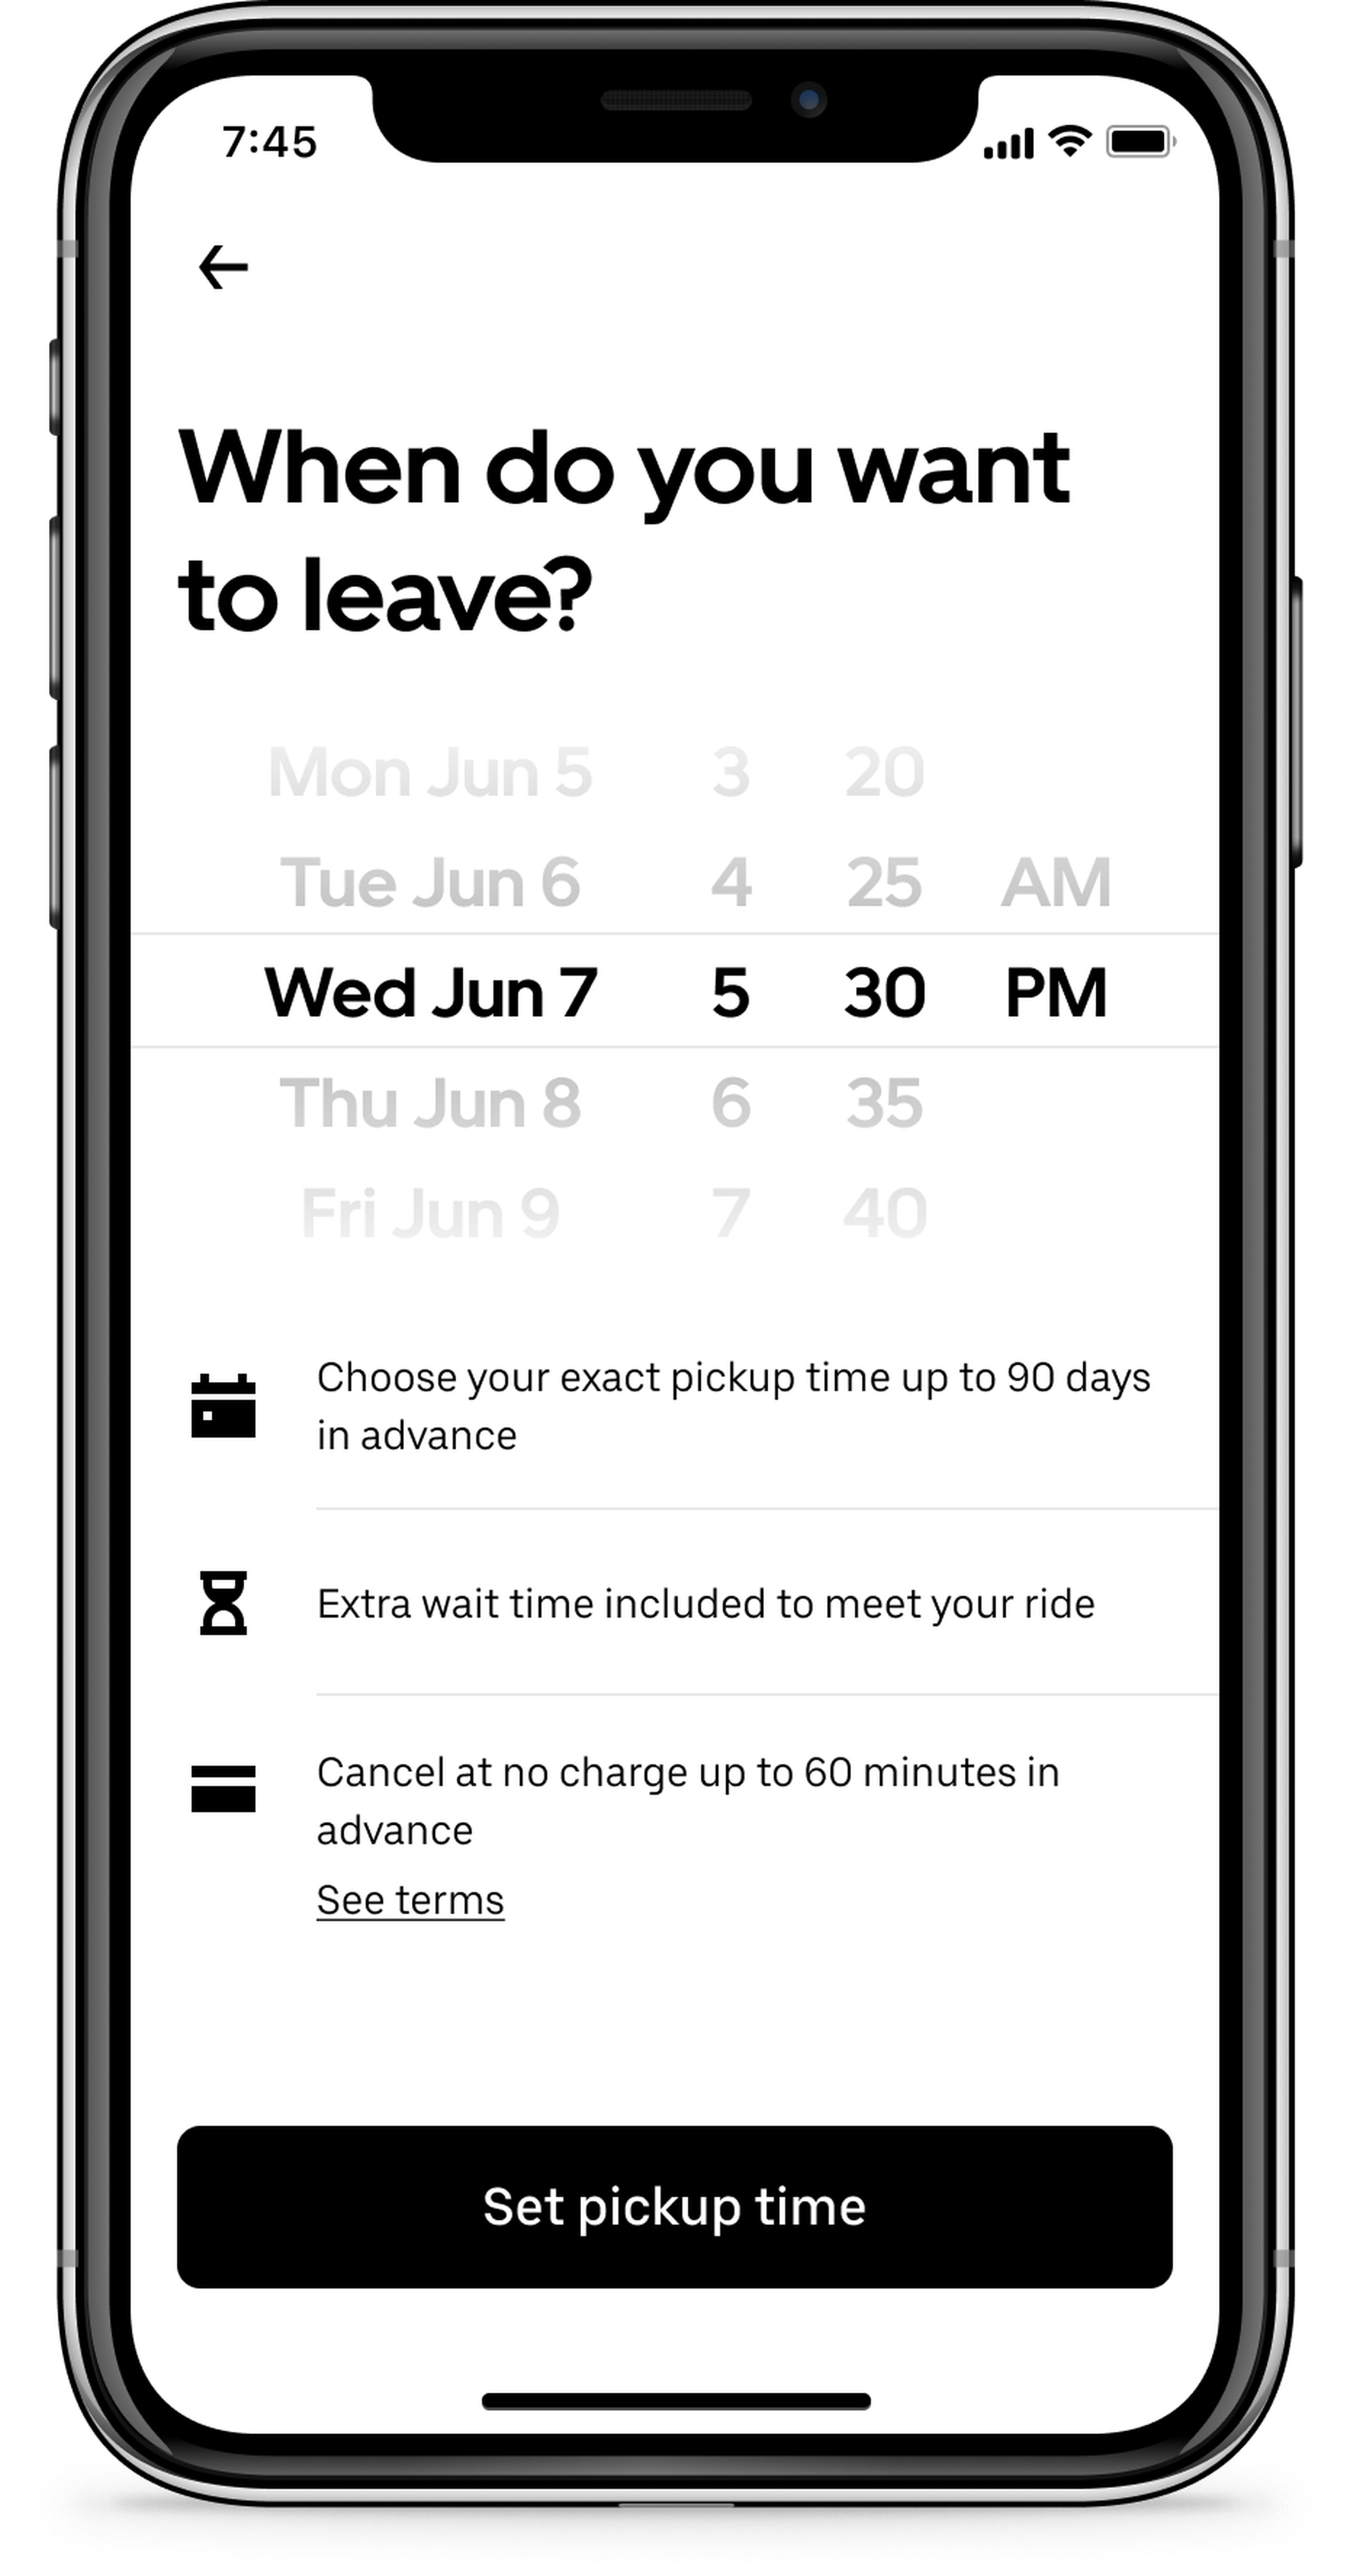 Uber Reserve lets you set a pickup time from the airport and gives you ample time to make it there or let you cancel it up to an hour in advance.